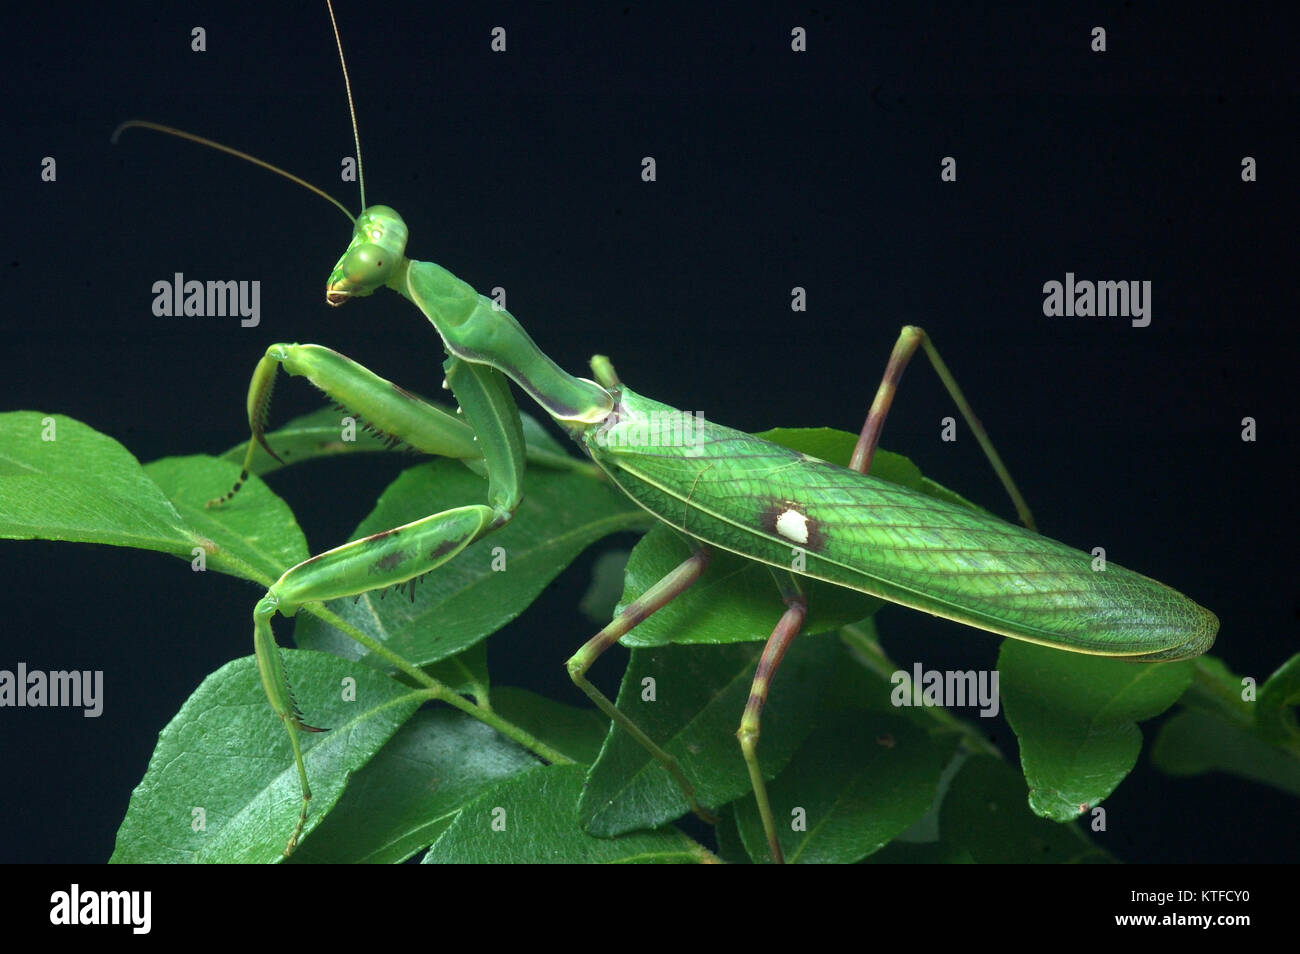 Spotted praying mantis, on leaves in Tamil Nadu, South India Stock Photo